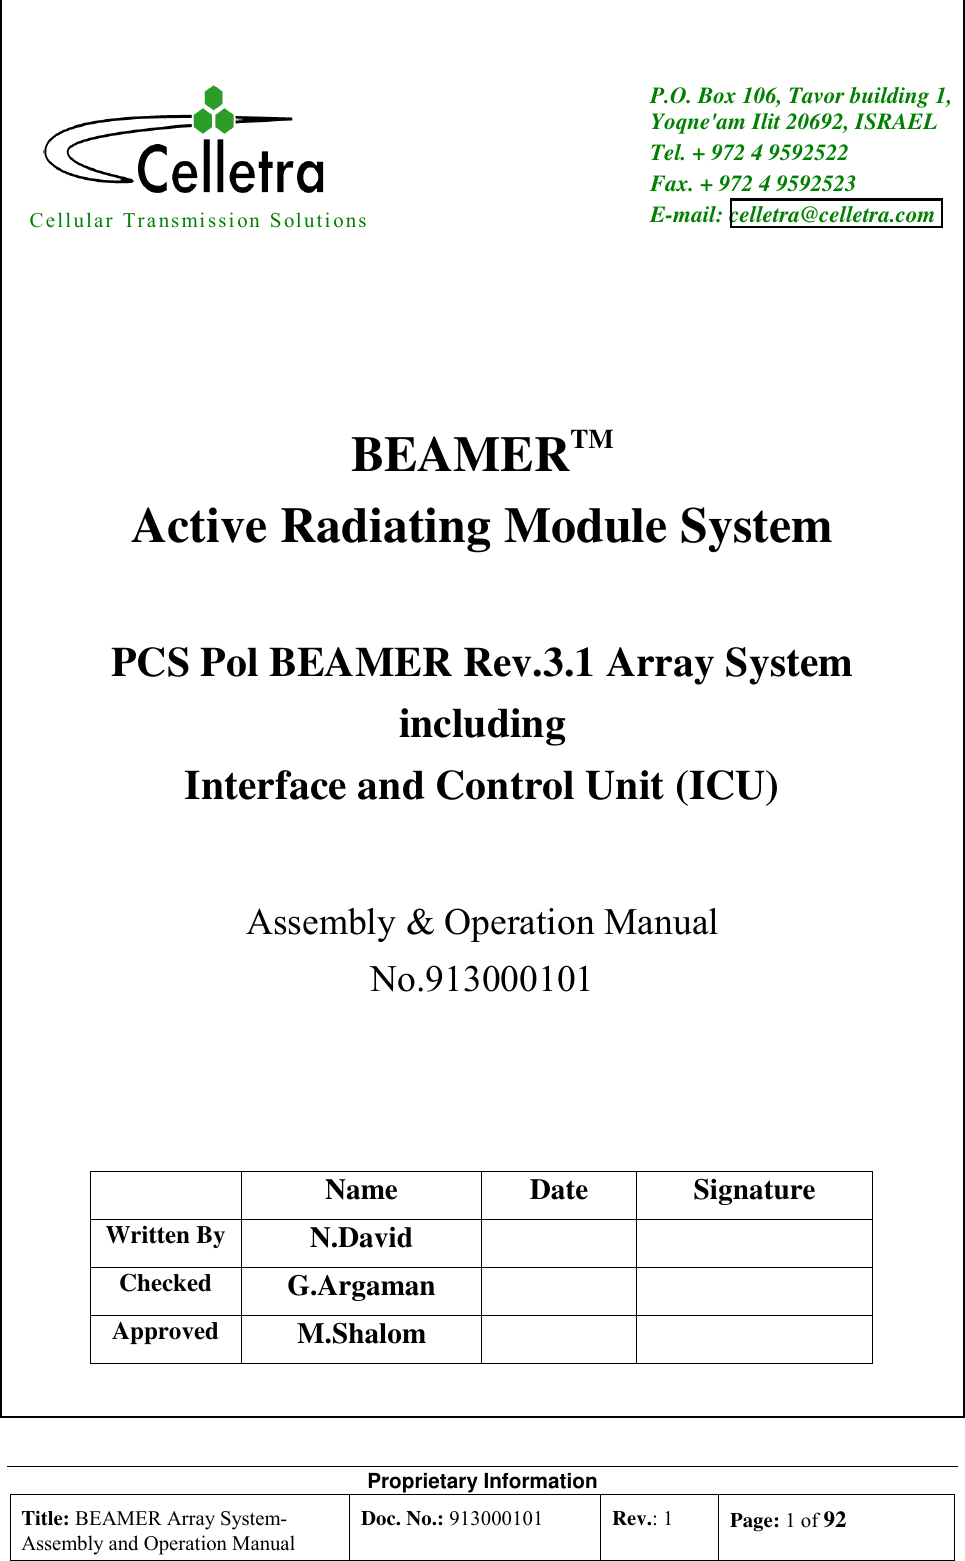 Proprietary Information Title: BEAMER Array System- Assembly and Operation Manual Doc. No.: 913000101  Rev.: 1  Page: 1 of 92      Cellular Transmission Solutions  P.O. Box 106, Tavor building 1,Yoqne&apos;am Ilit 20692, ISRAEL Tel. + 972 4 9592522 Fax. + 972 4 9592523 E-mail: celletra@celletra.com     BEAMERTM Active Radiating Module System  PCS Pol BEAMER Rev.3.1 Array System  including Interface and Control Unit (ICU)   Assembly &amp; Operation Manual No.913000101      Name Date Signature Written By  N.David    Checked  G.Argaman    Approved  M.Shalom     